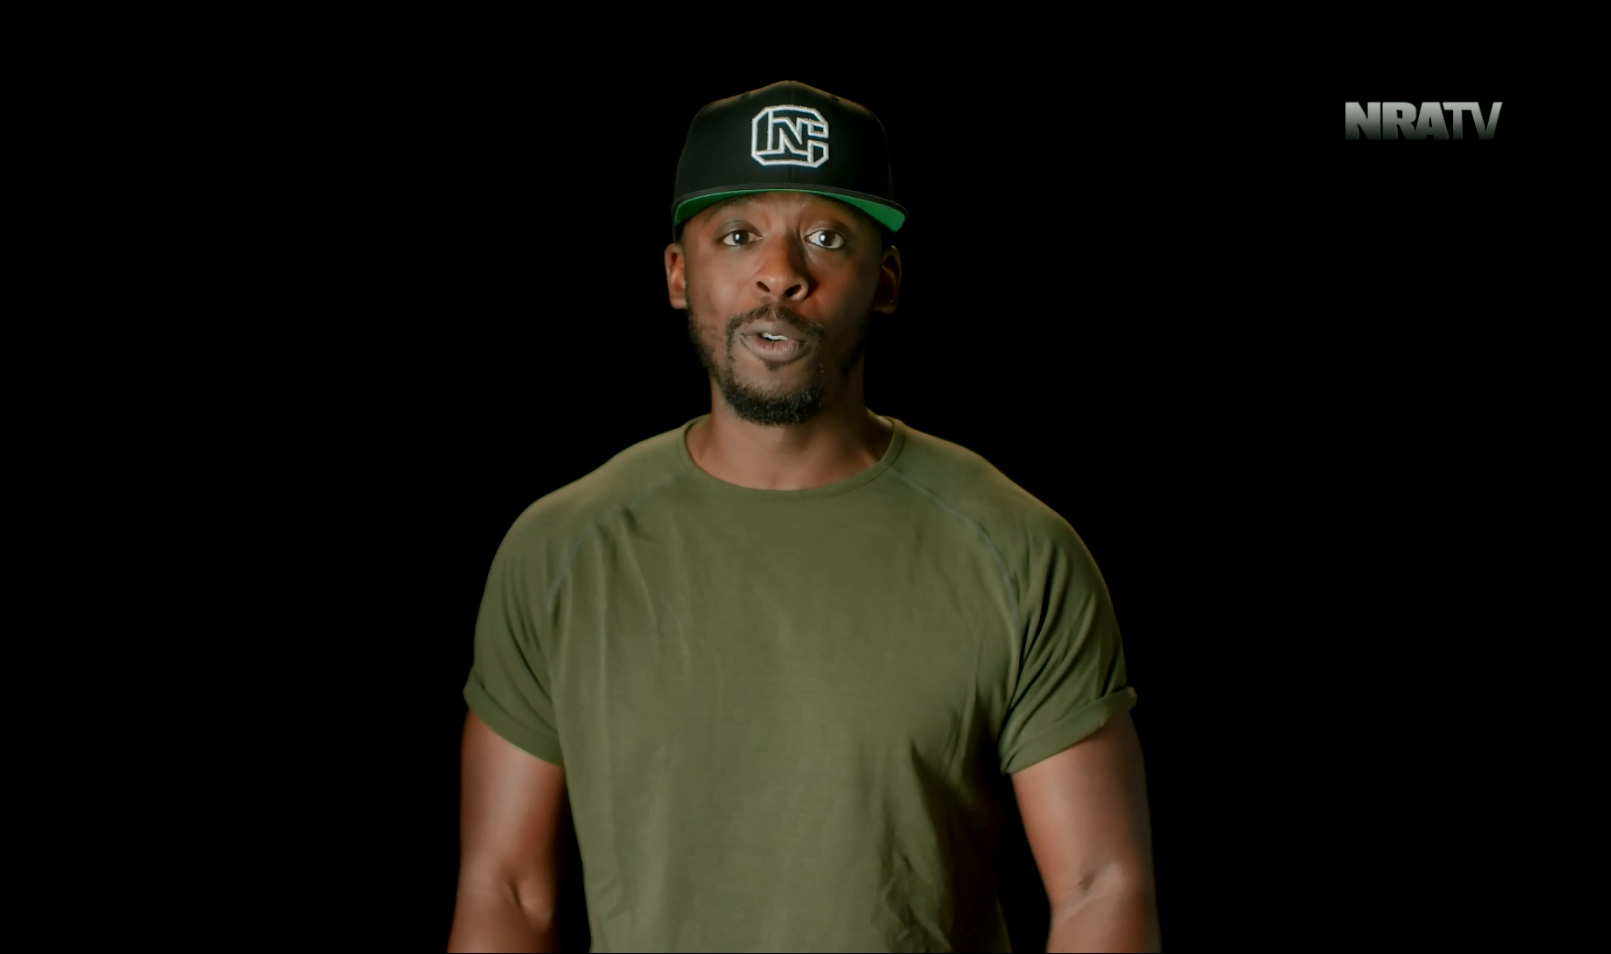 For NRA TV'S Colion Noir, Happiness Is a Warm Gun